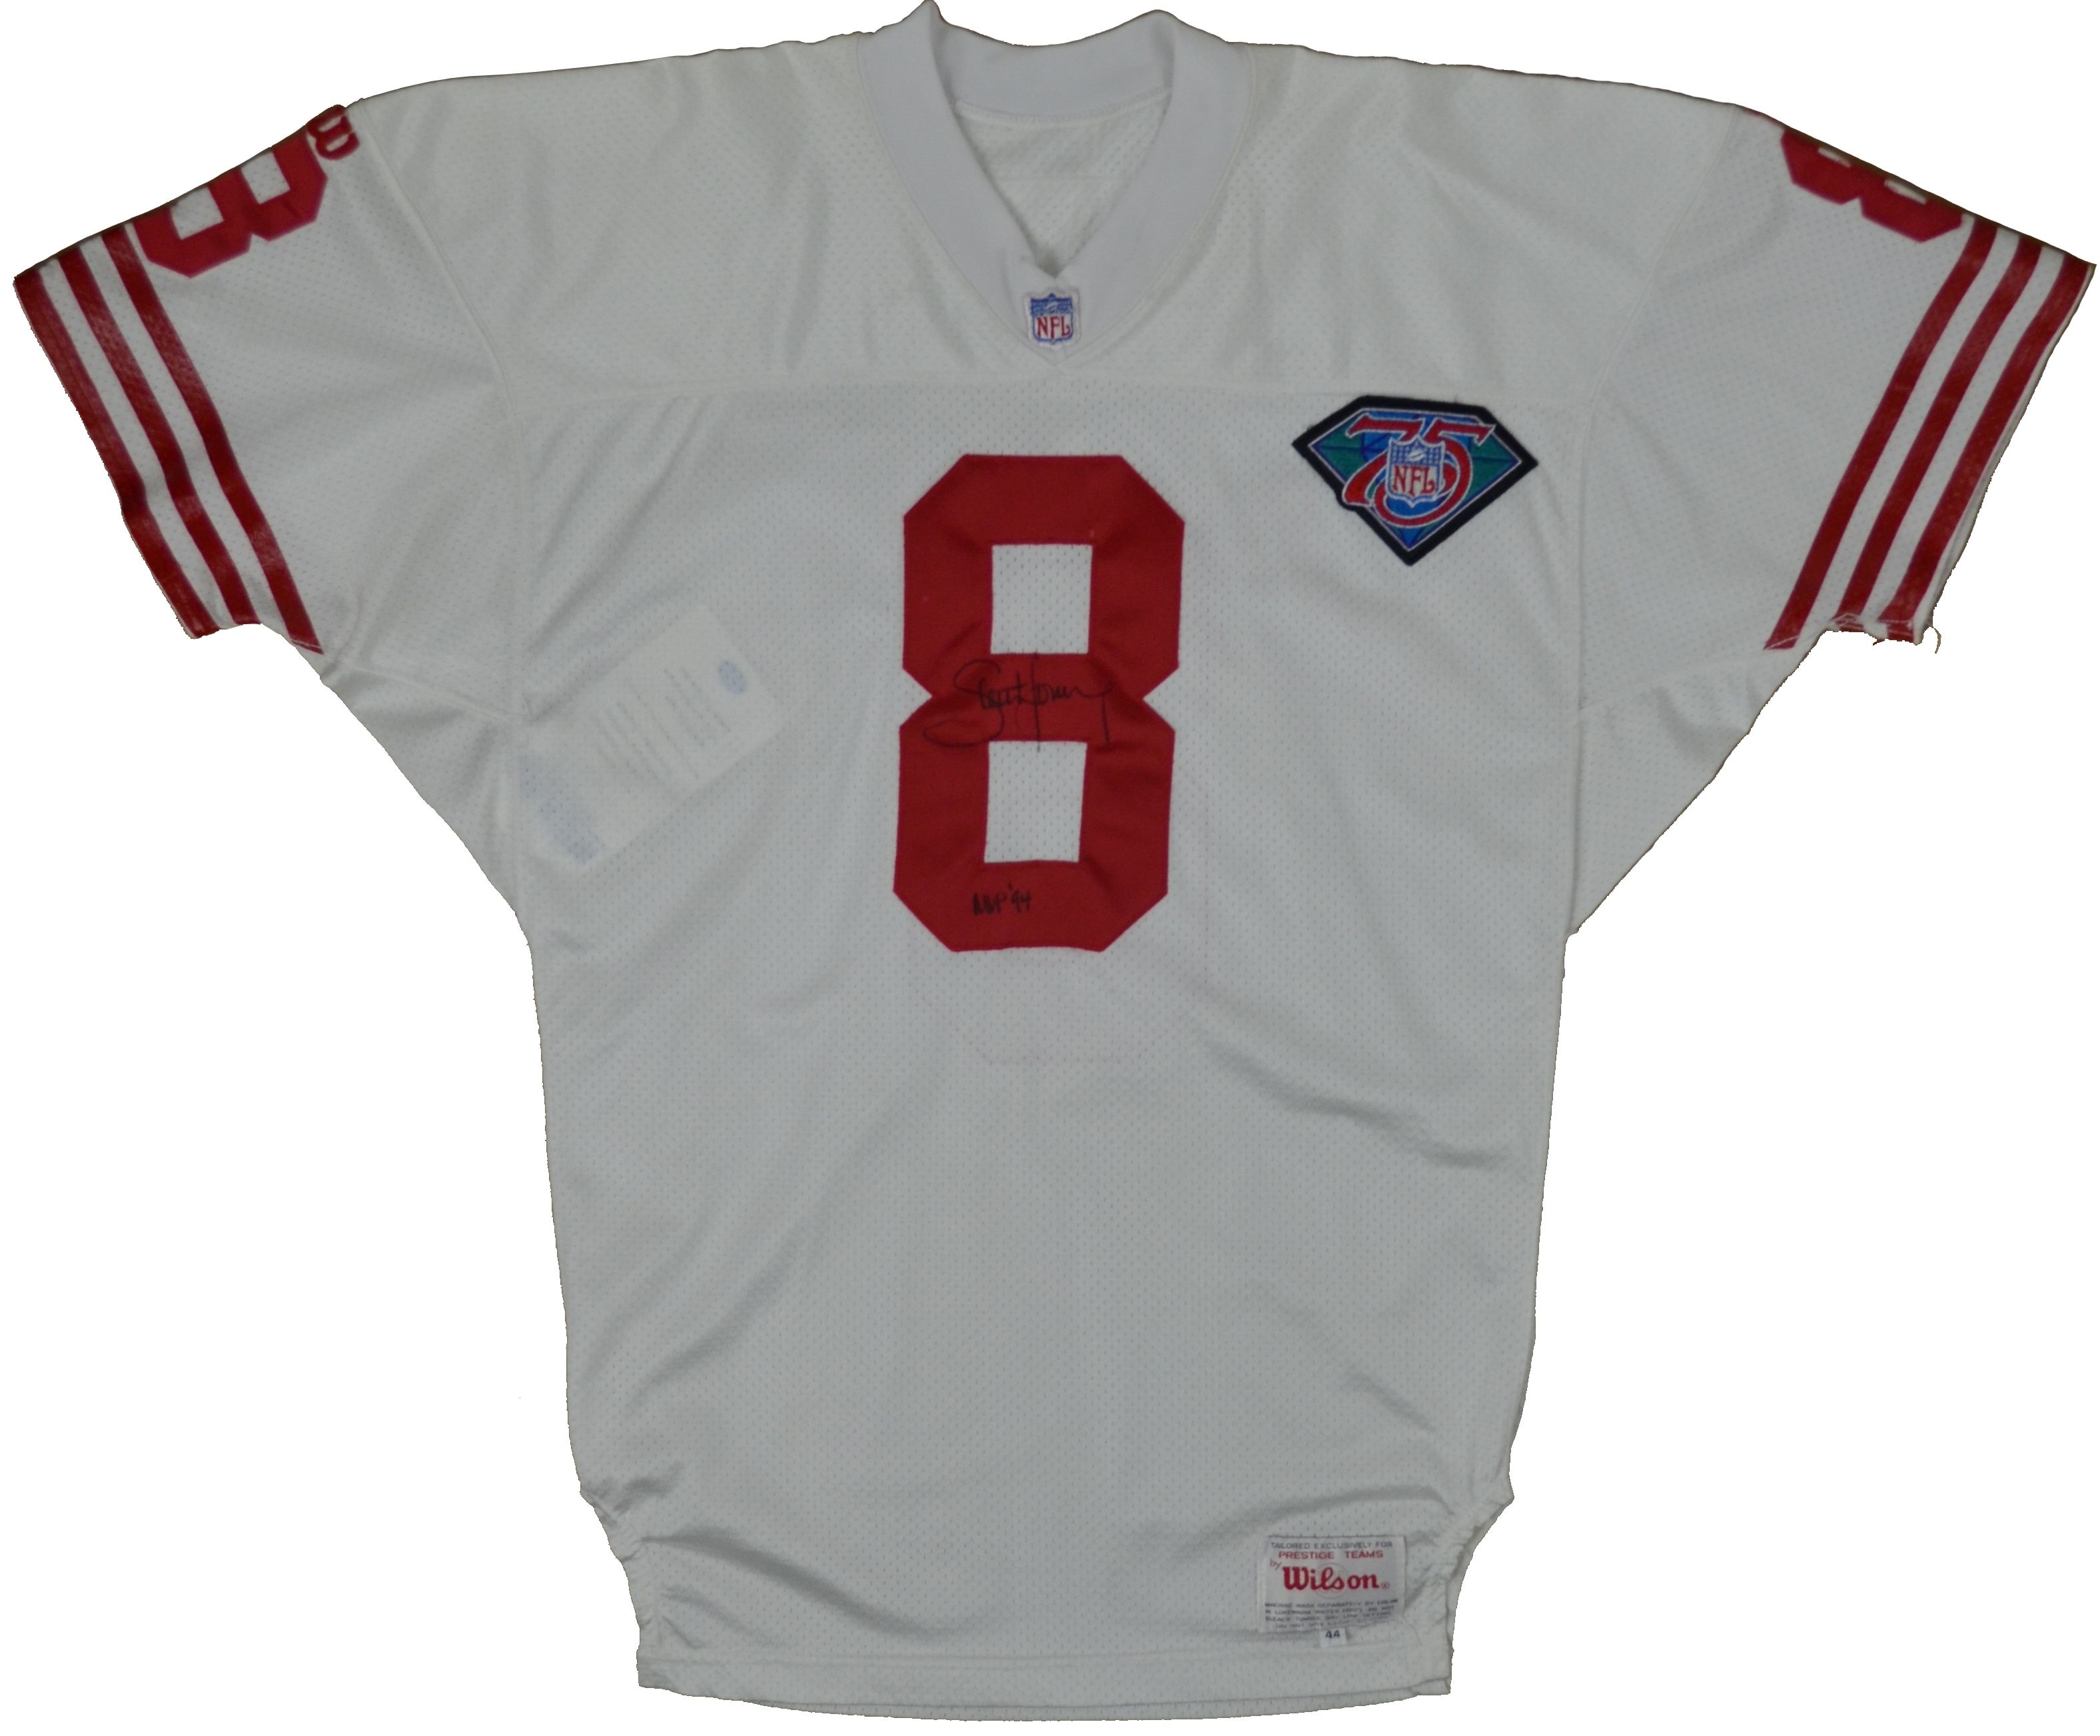 49ers young jersey